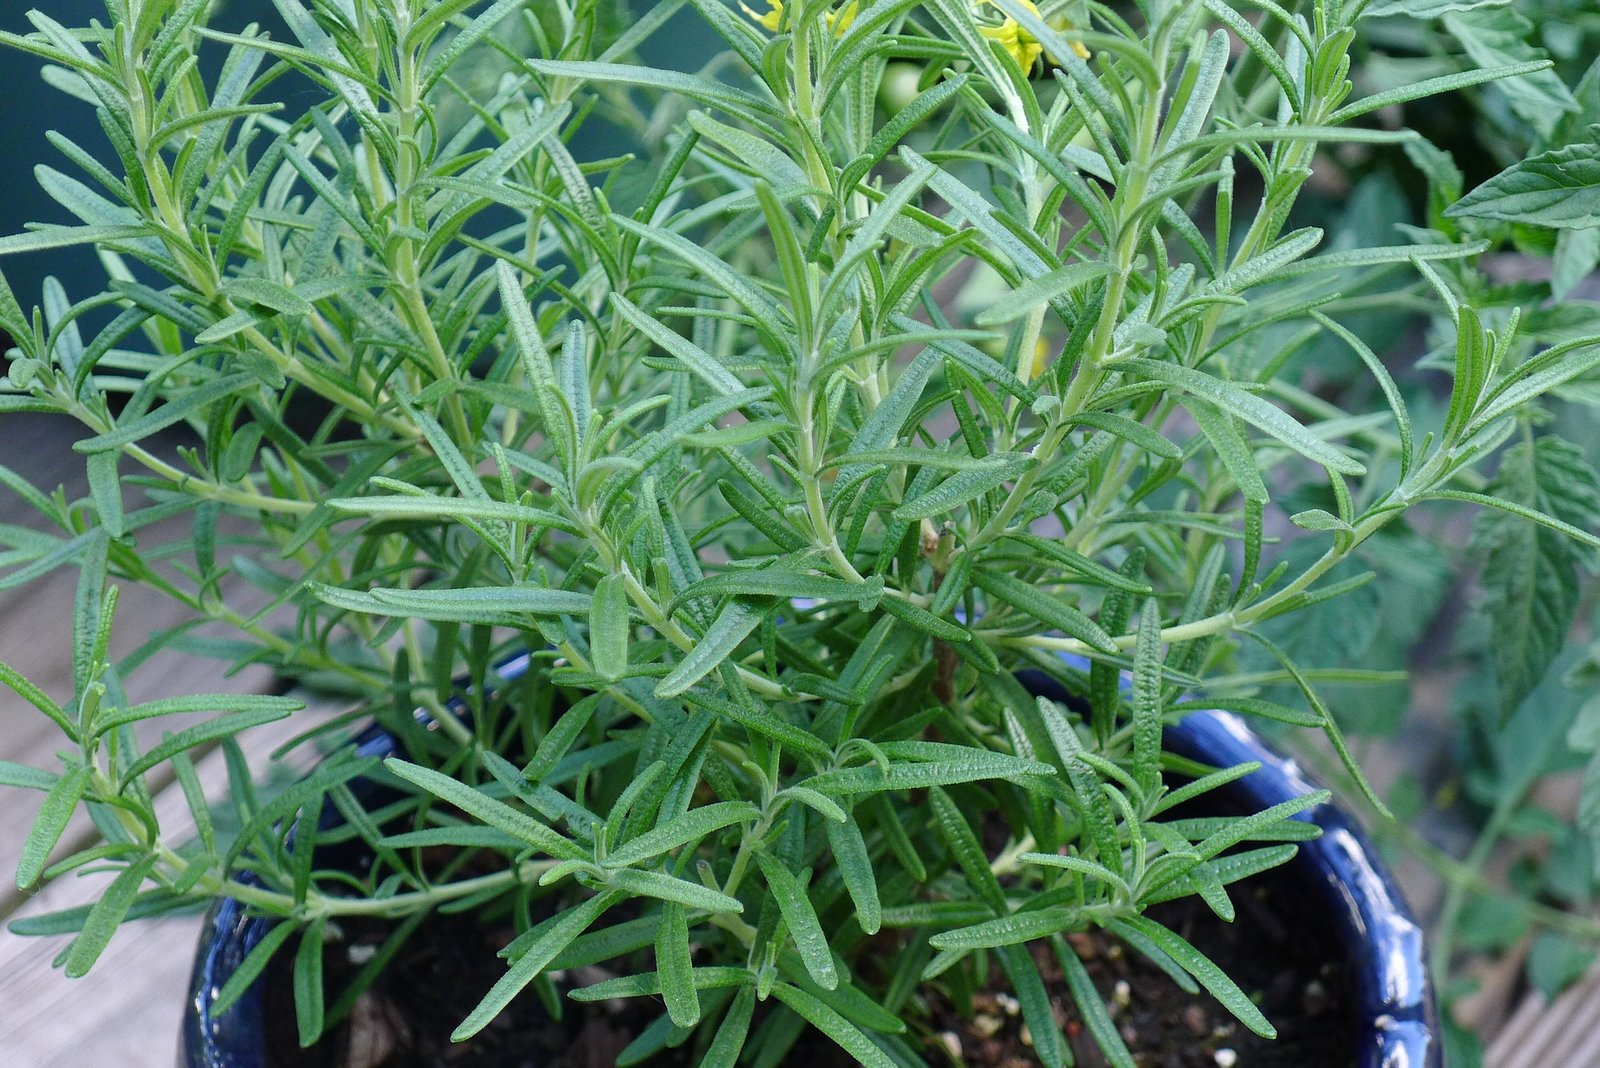 10 Simple Herbal Remedies From Your Garden - Rosemary